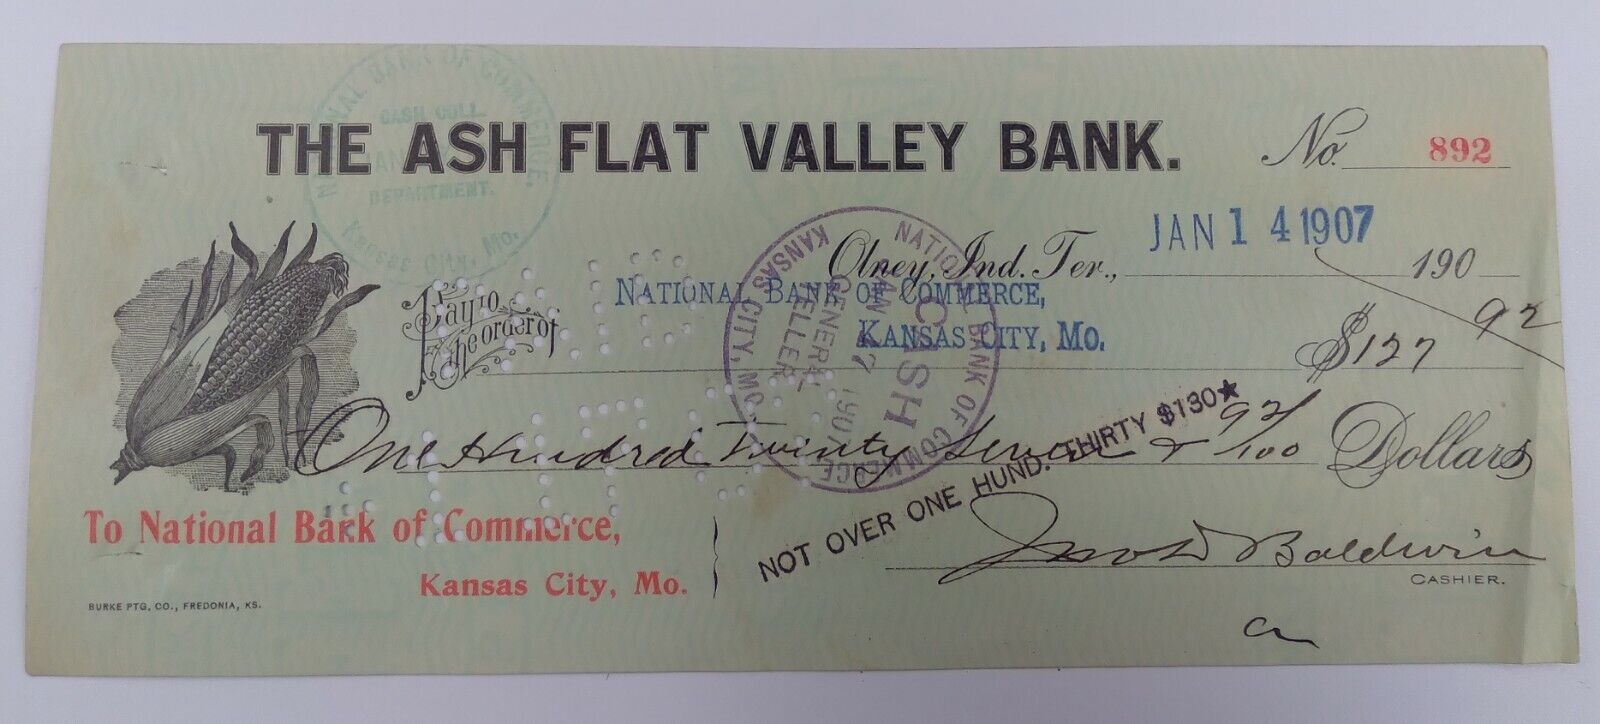 Canceled Check from Olney, Indian Territory (Oklahoma). The Ash Flat Valley Bank